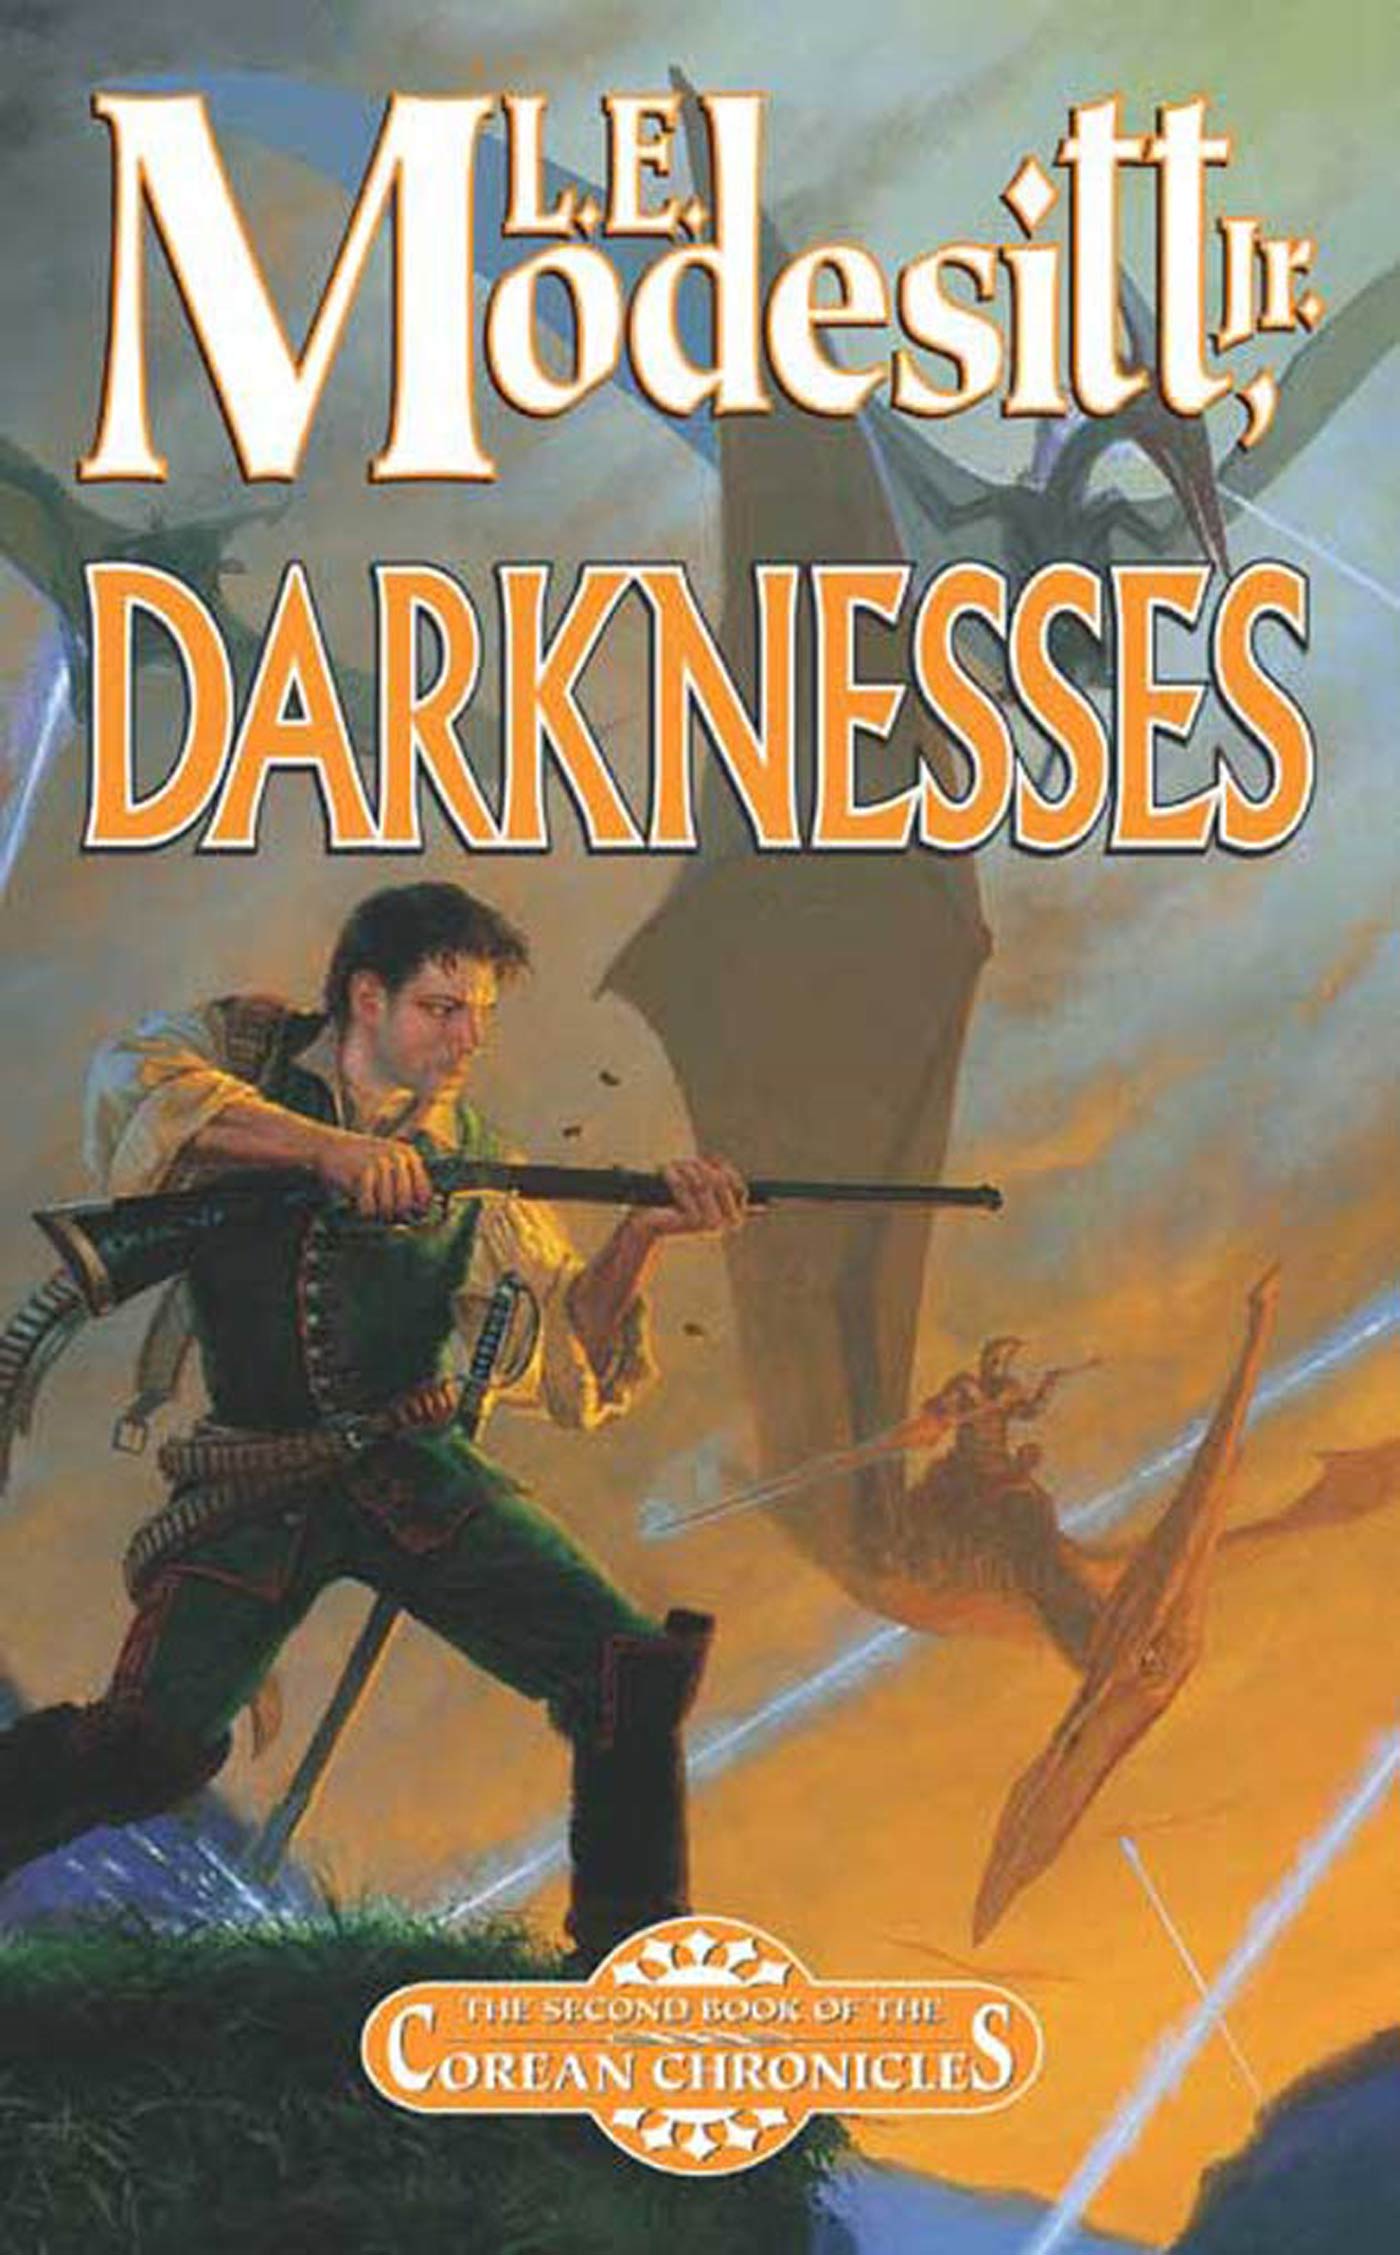 Darknesses : The Second Book of the Corean Chronicles by L. E. Modesitt, Jr.